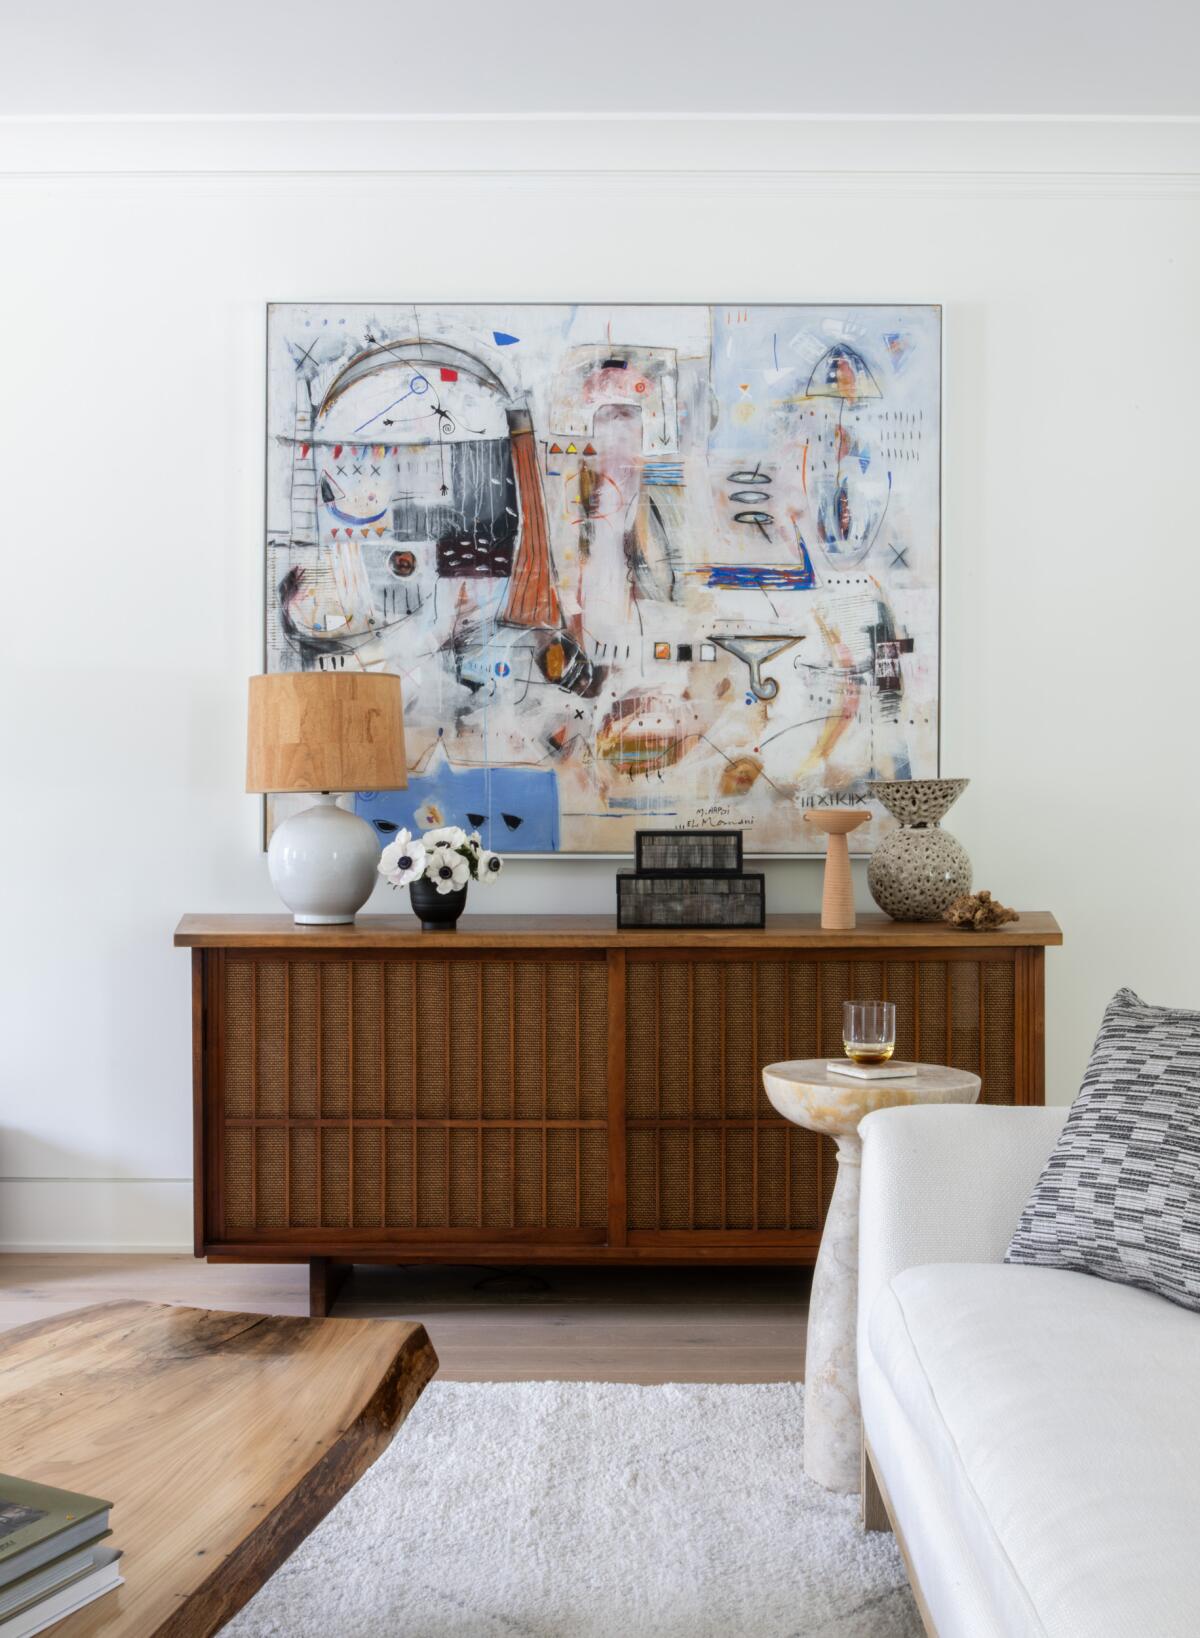 An abstract painting inspires the palette and furnishings of this living room.